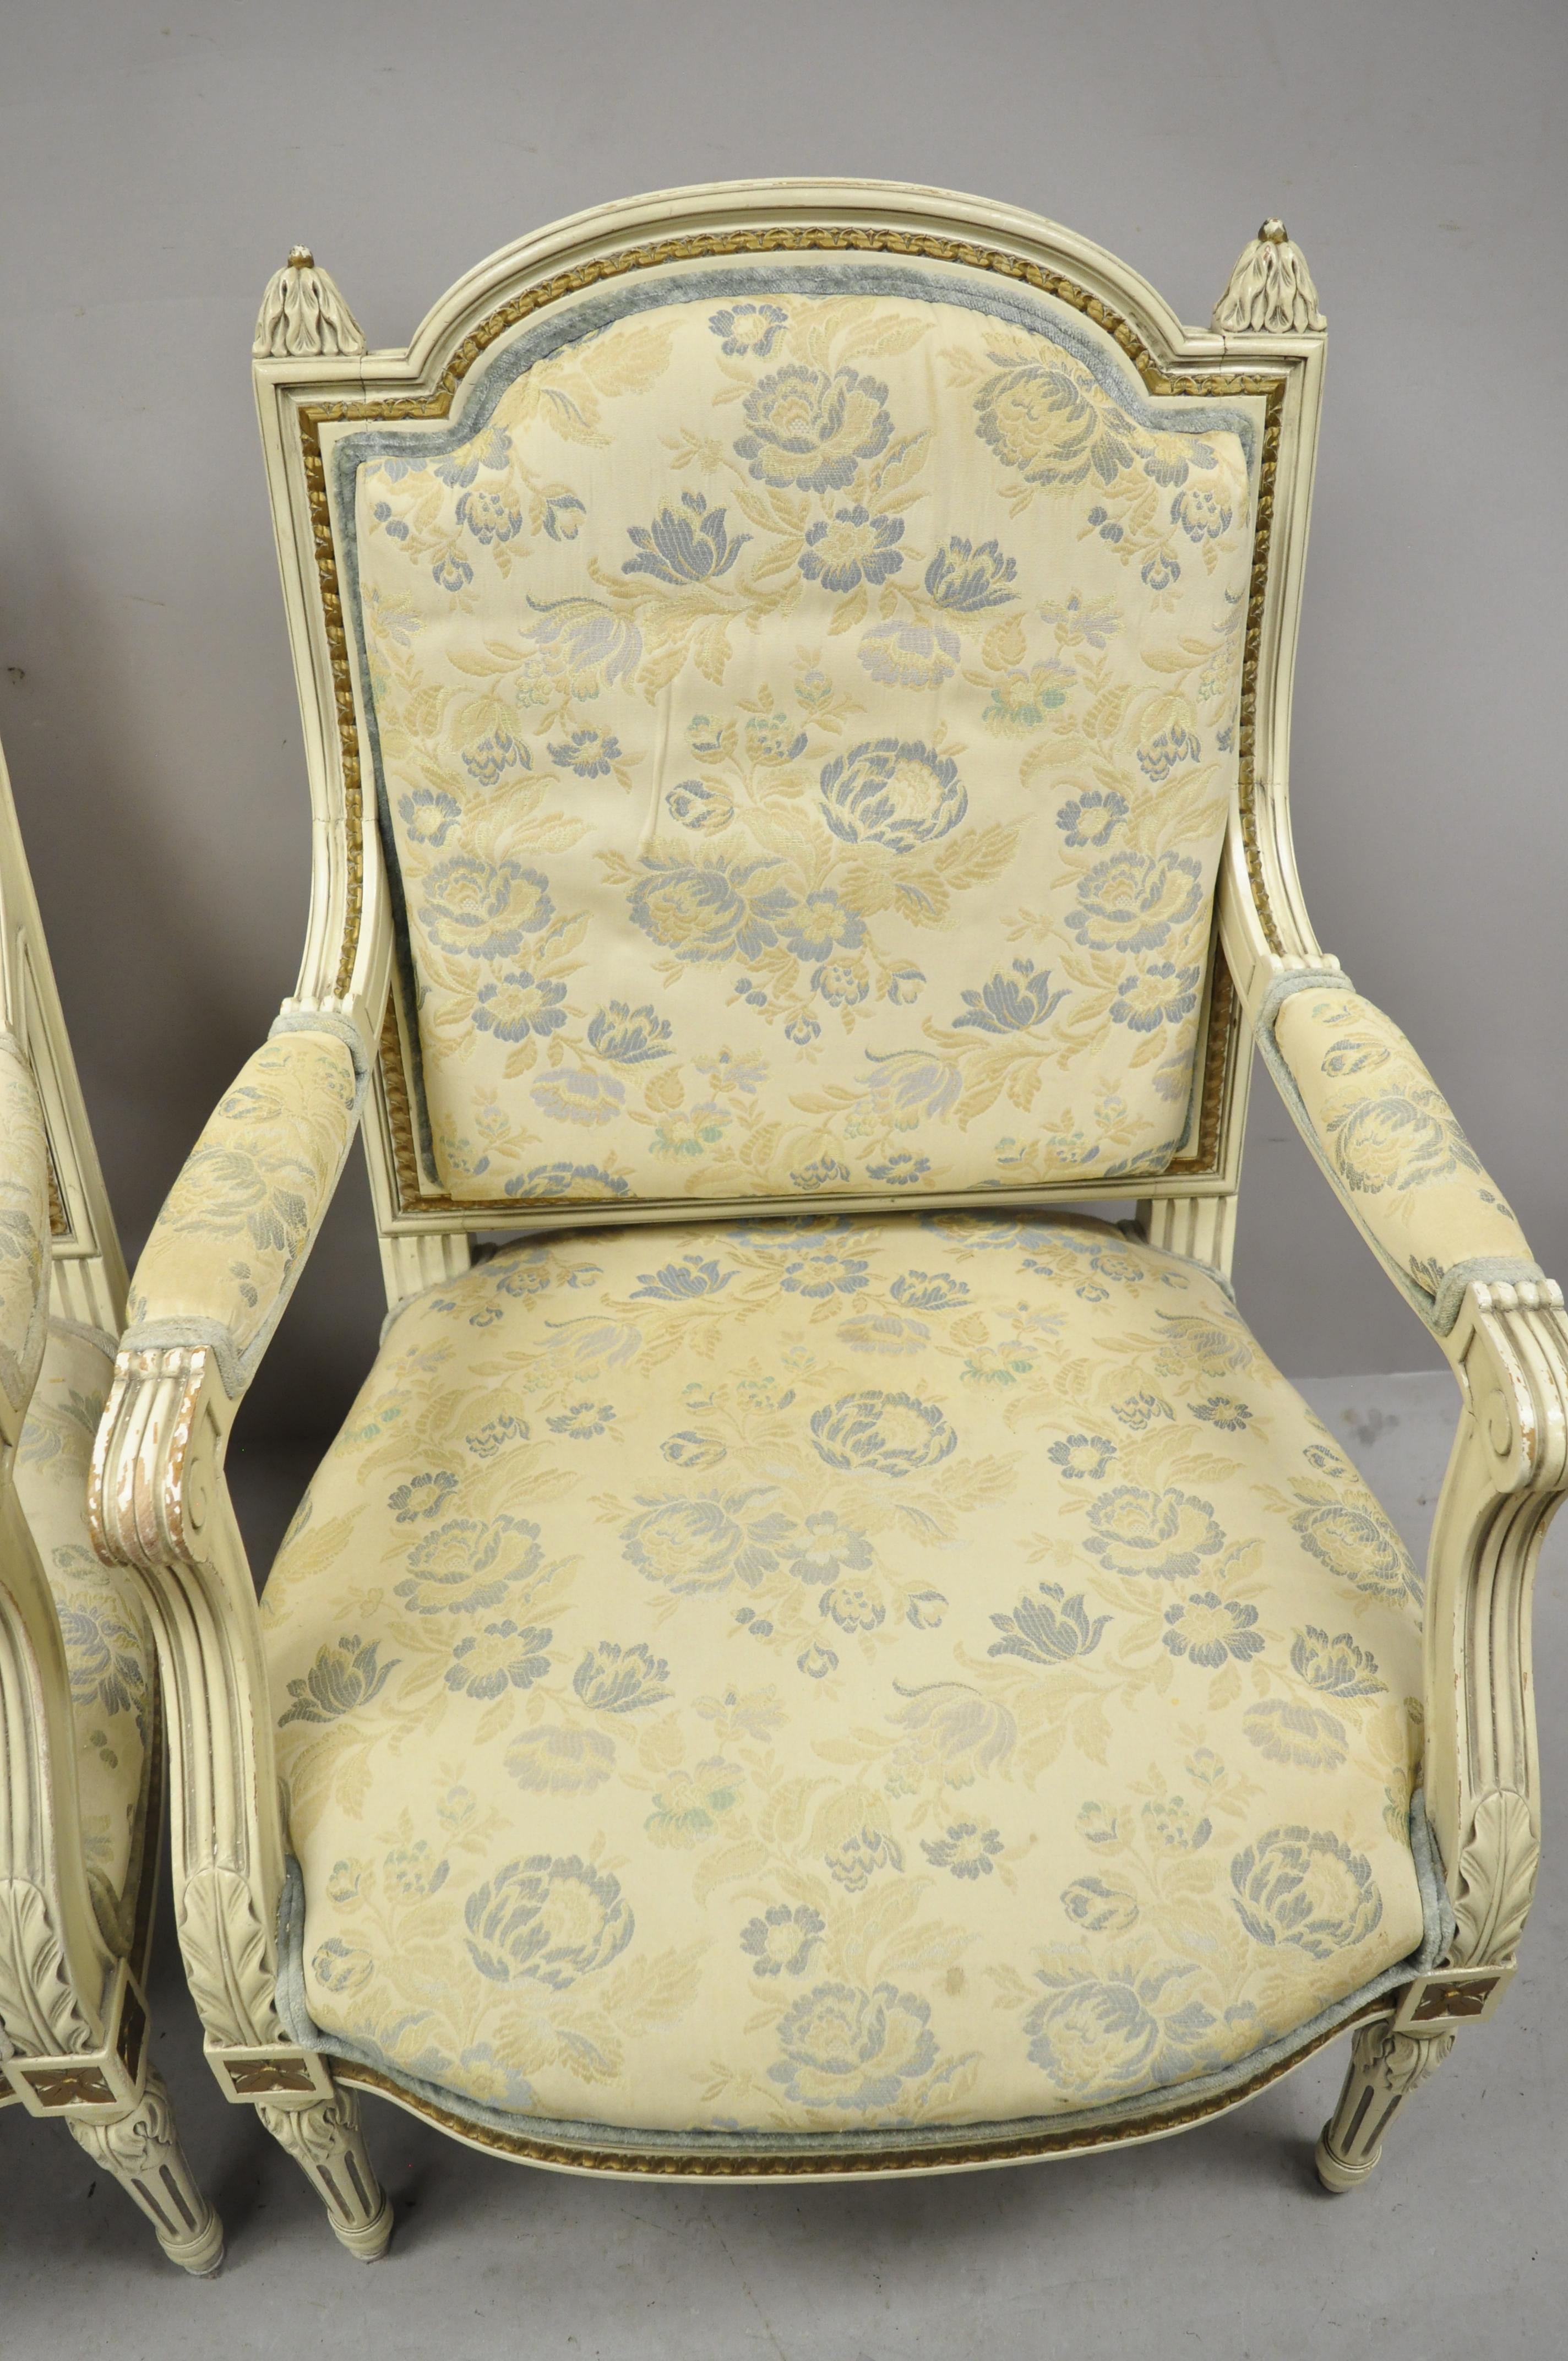 Vintage French Provincial Louis XVI Cream Painted Fauteuil Armchairs, a Pair In Good Condition For Sale In Philadelphia, PA